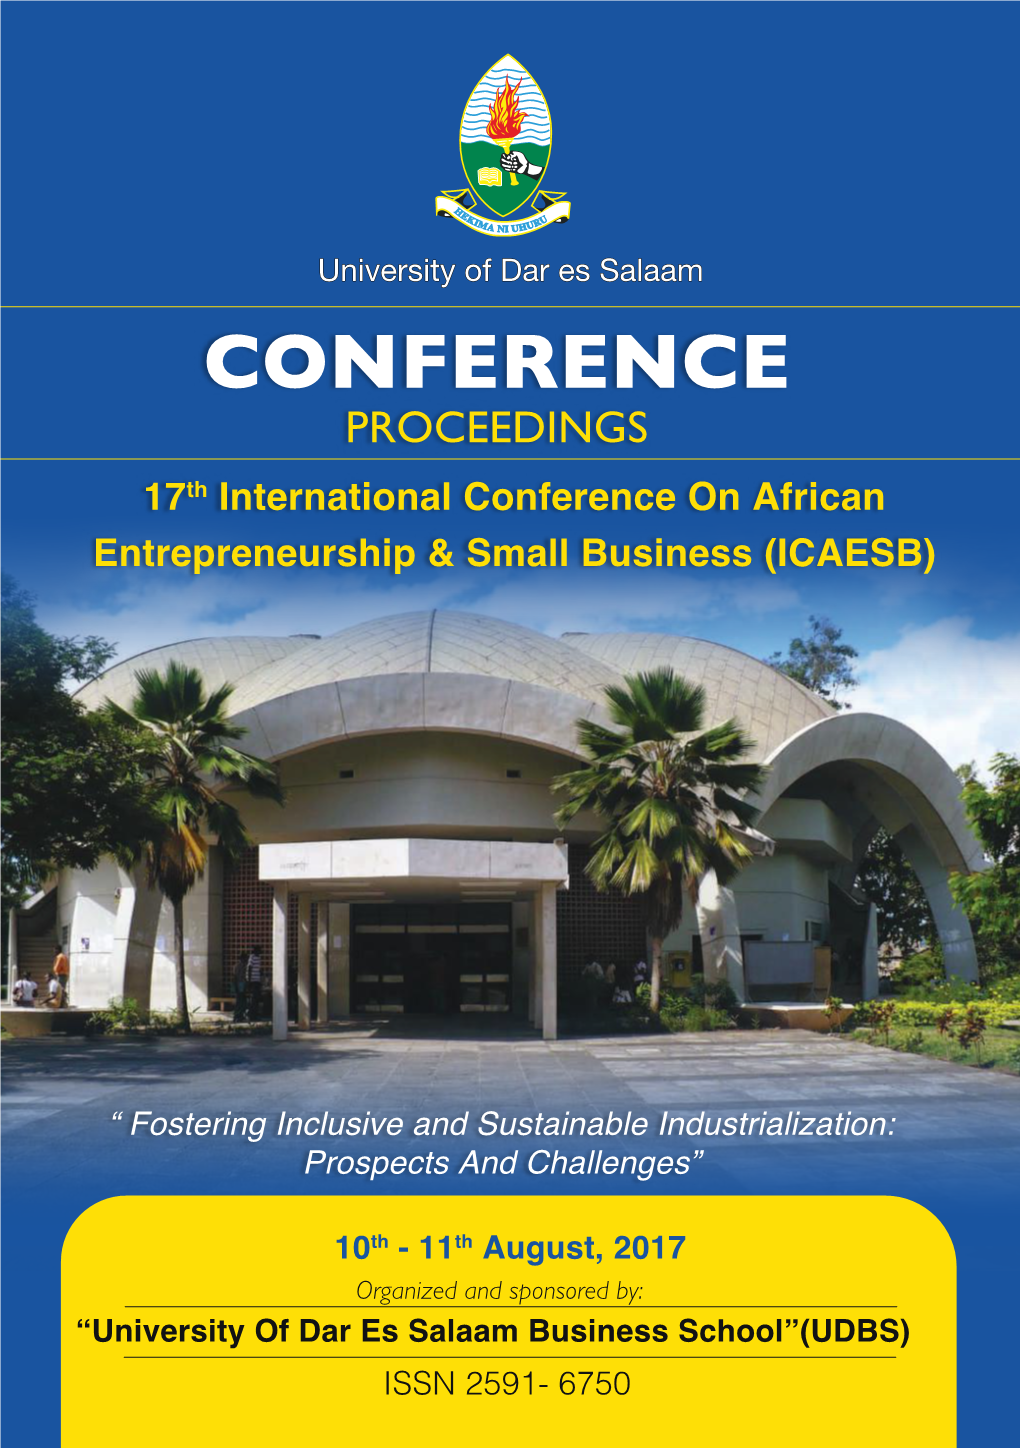 CONFERENCE PROCEEDINGS 17Th International Conference on African Entrepreneurship & Small Business (ICAESB)